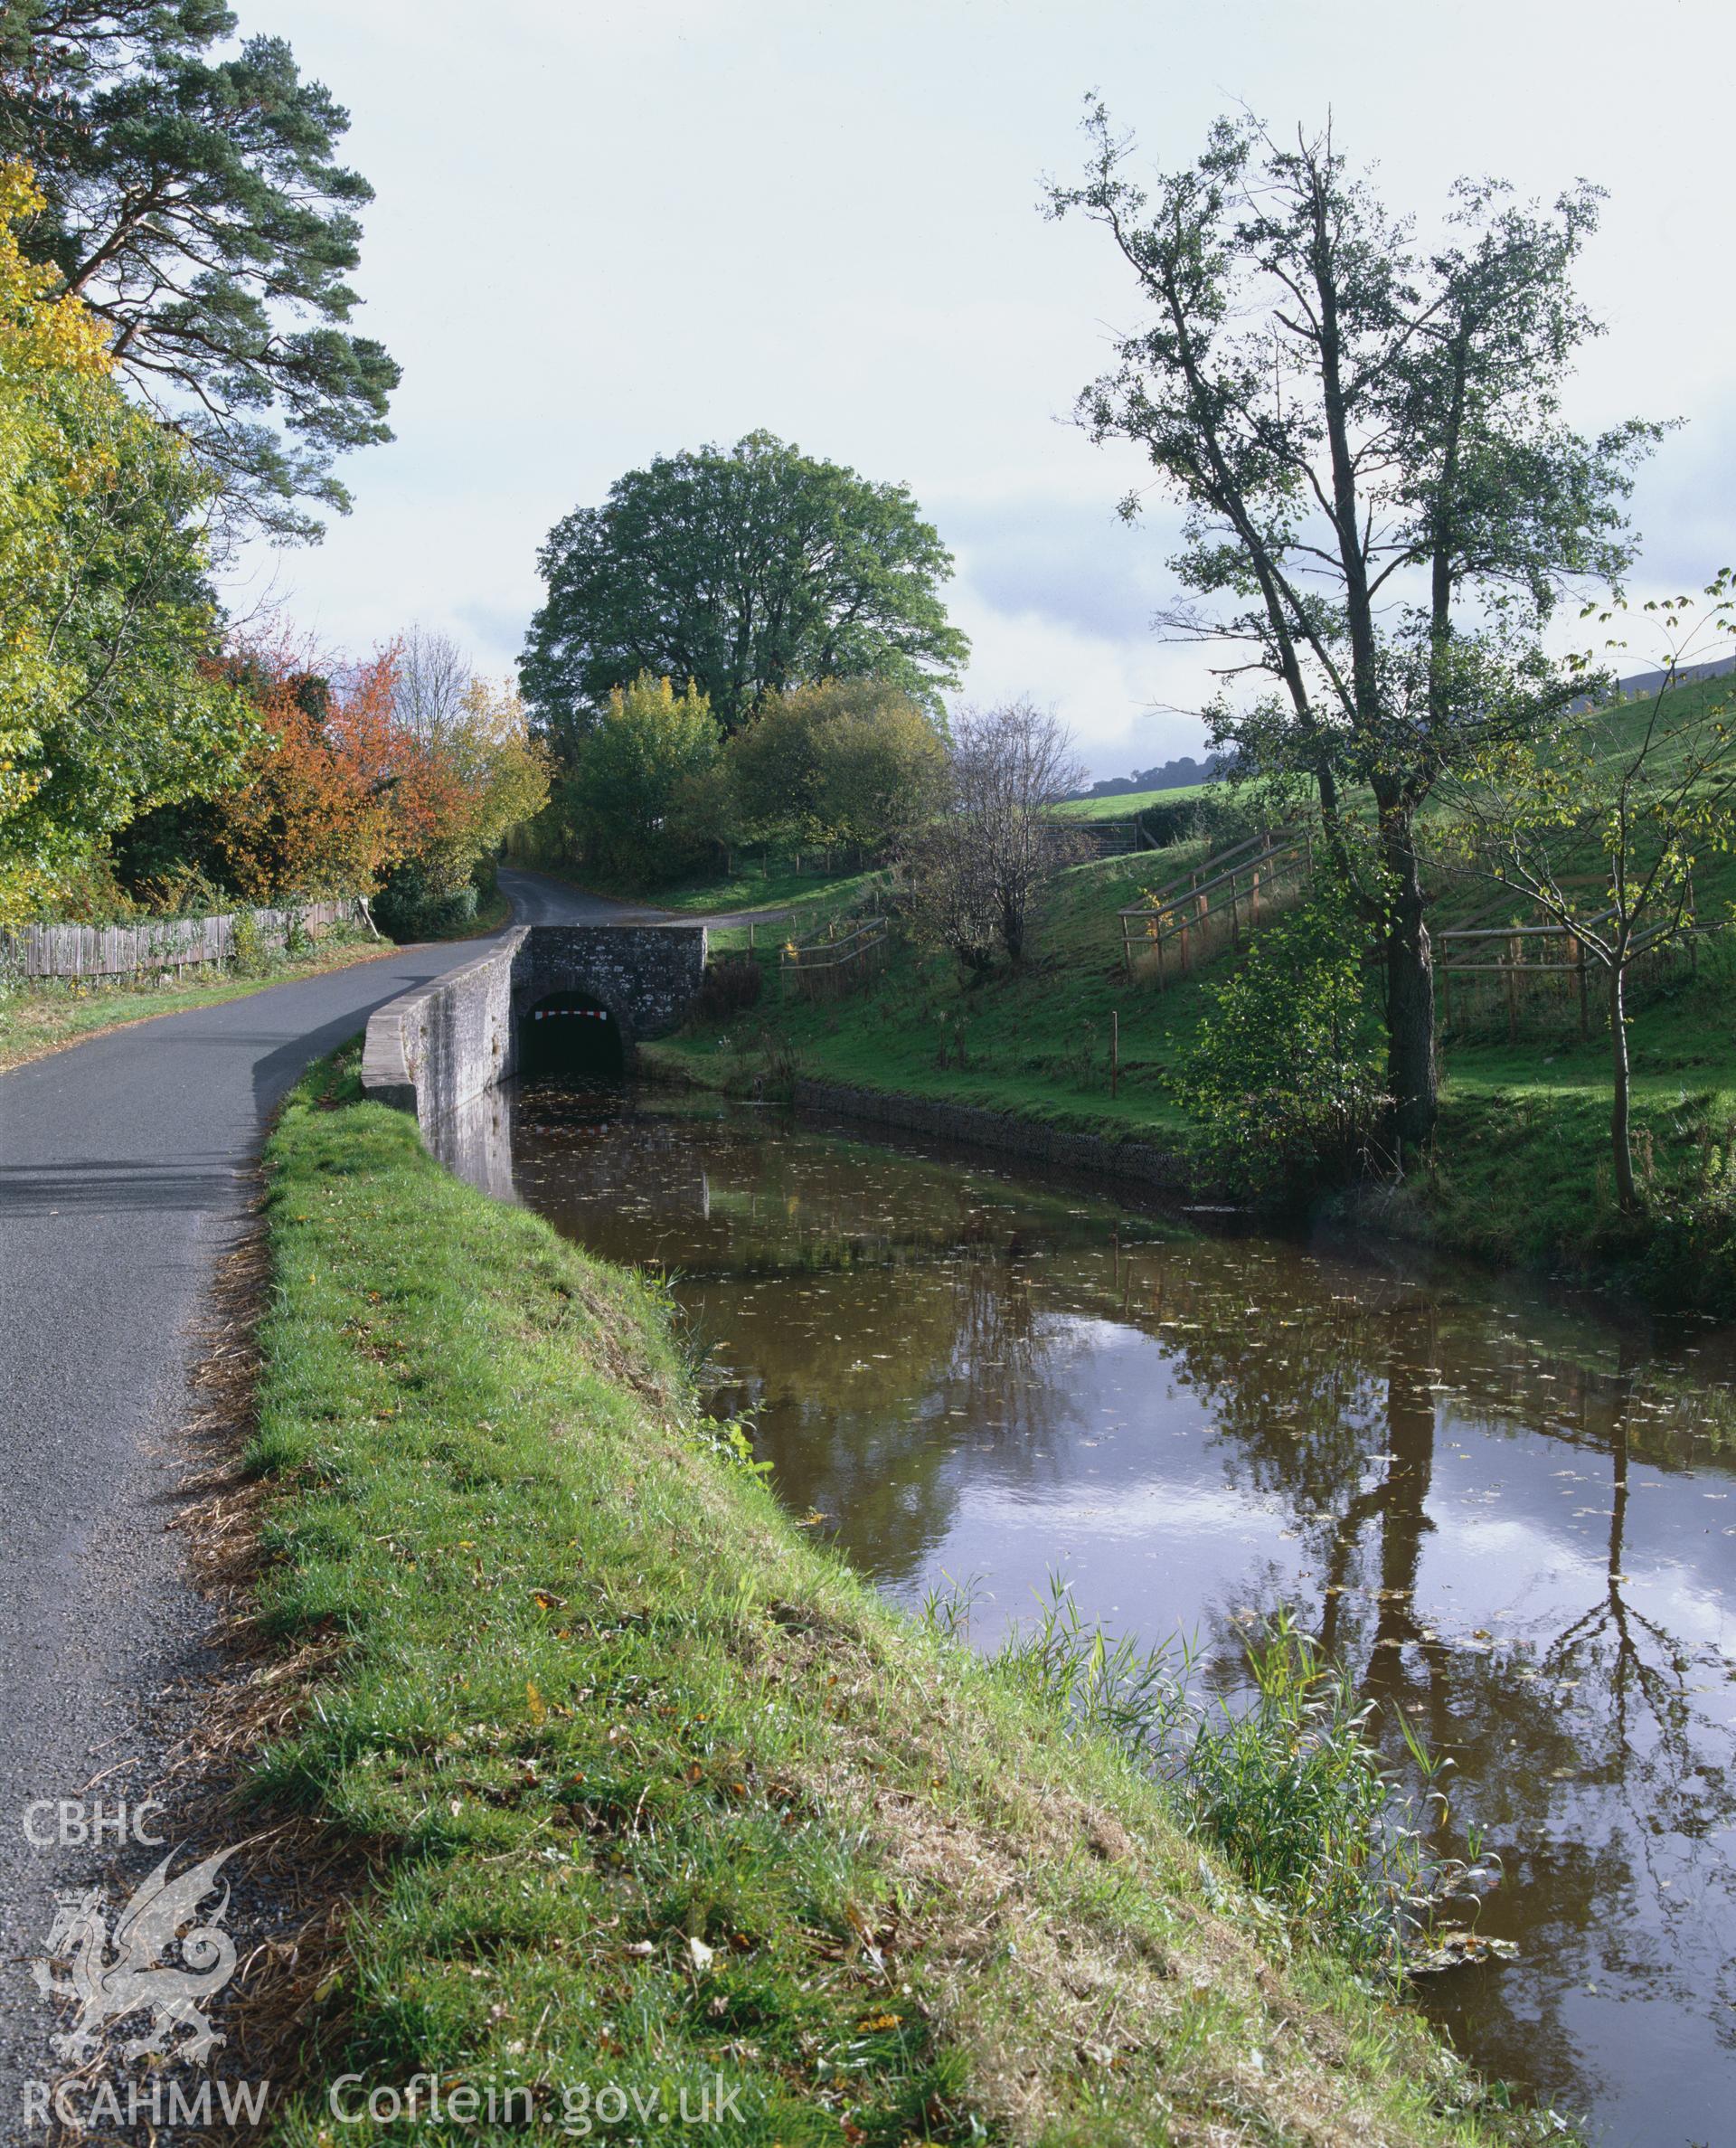 RCAHMW colour transparency showing view of the Ashford Tunnel, Brecon and Monmouth Canal.